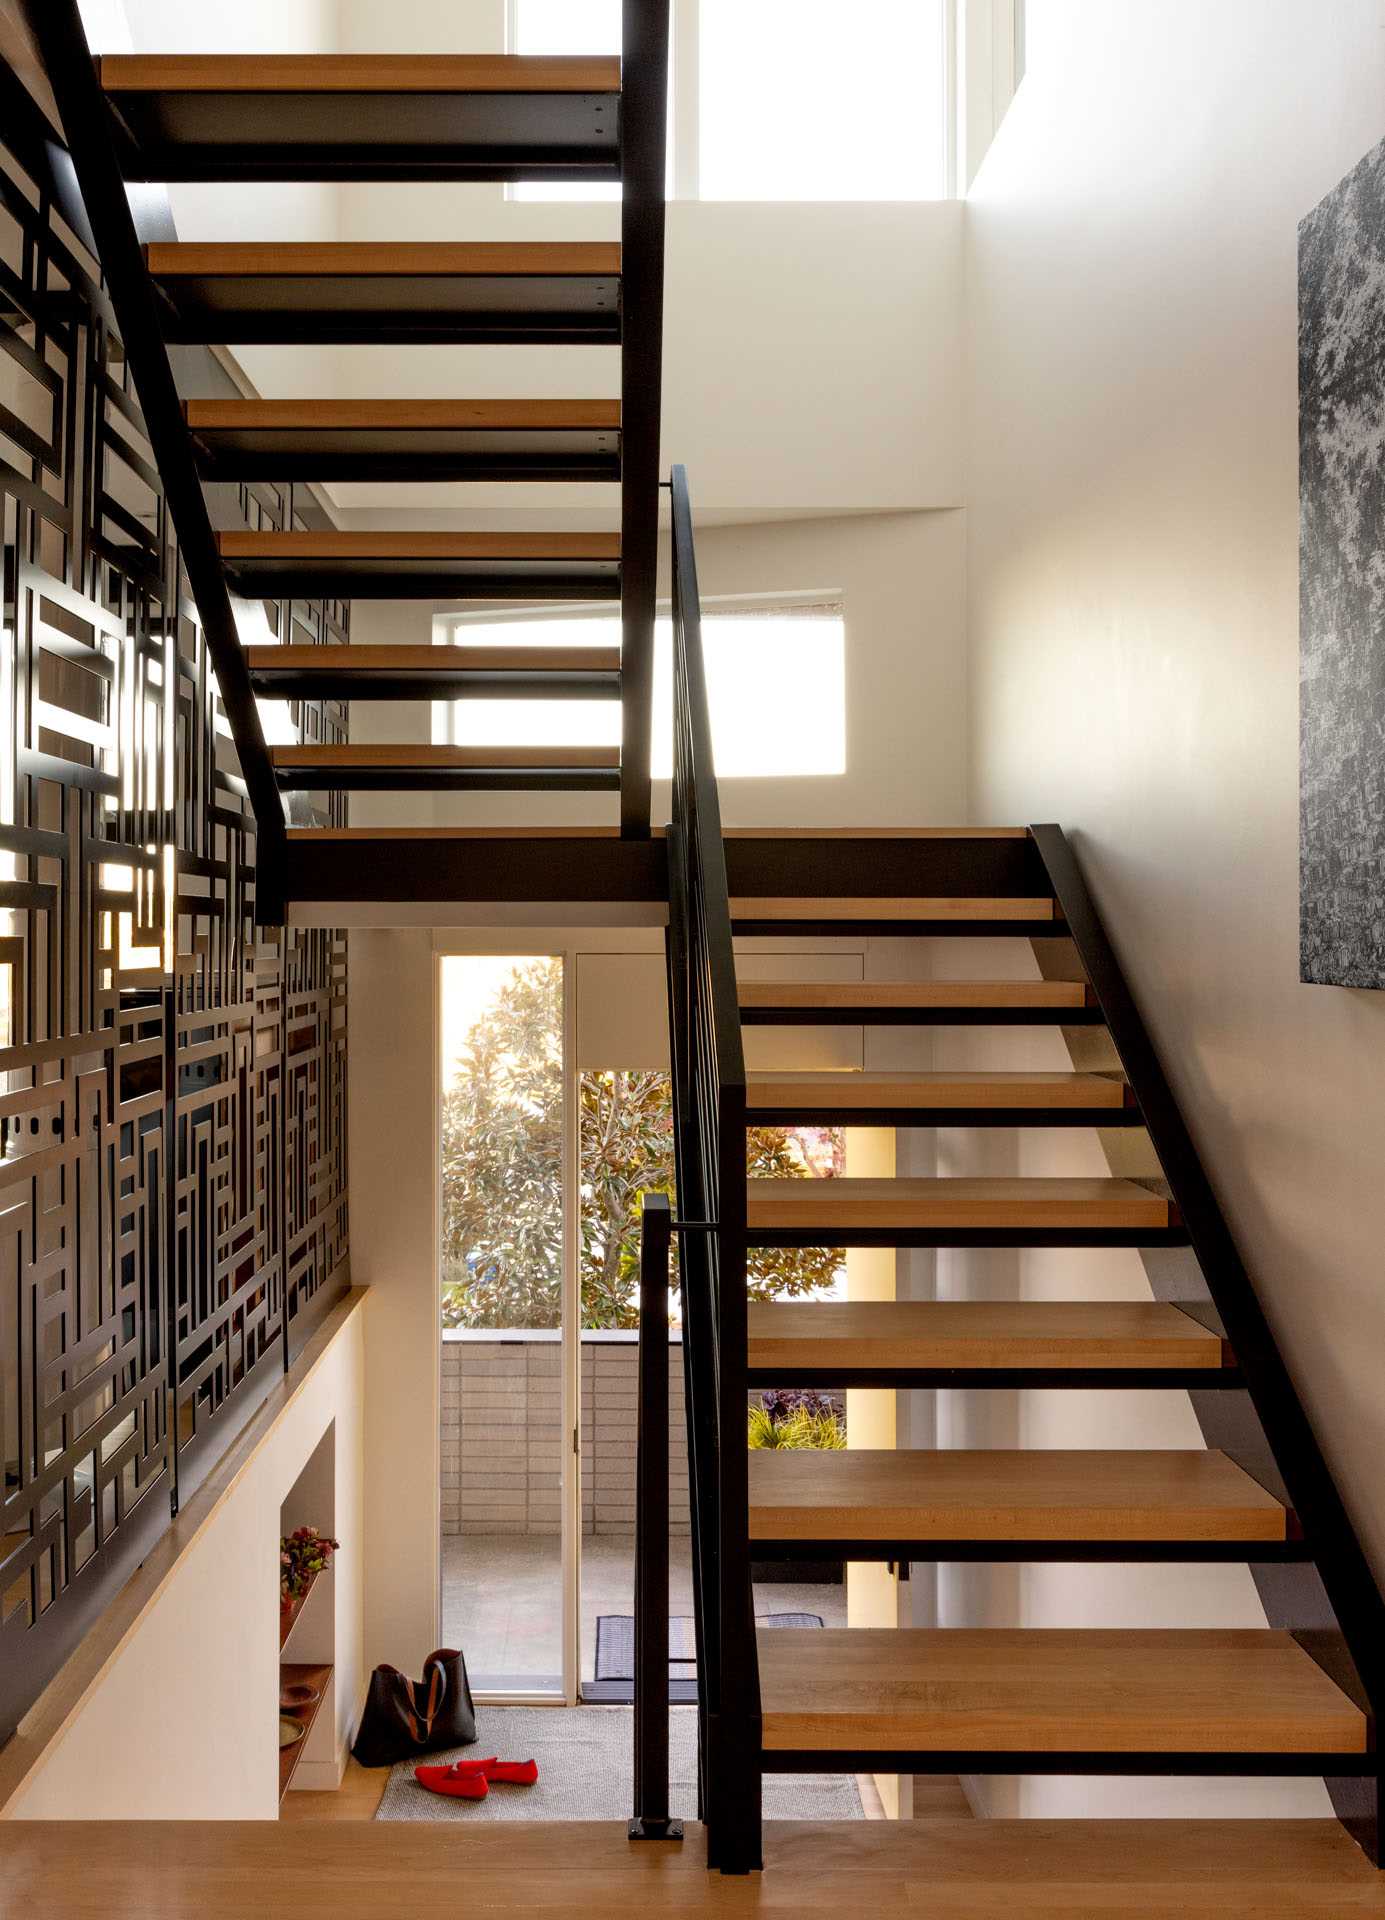 Fall protection was integrated into the design of these wood and steel stairs through a patterned screen.